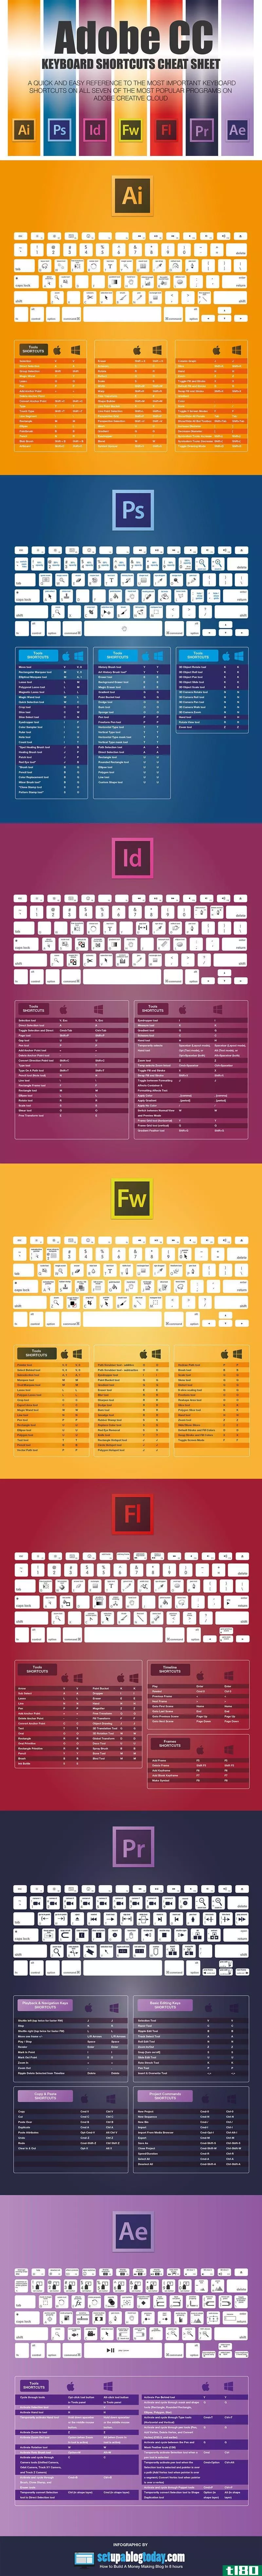 Illustration for article titled Learn All the Keyboard Shortcuts for Adobe Apps with This Cheat Sheet